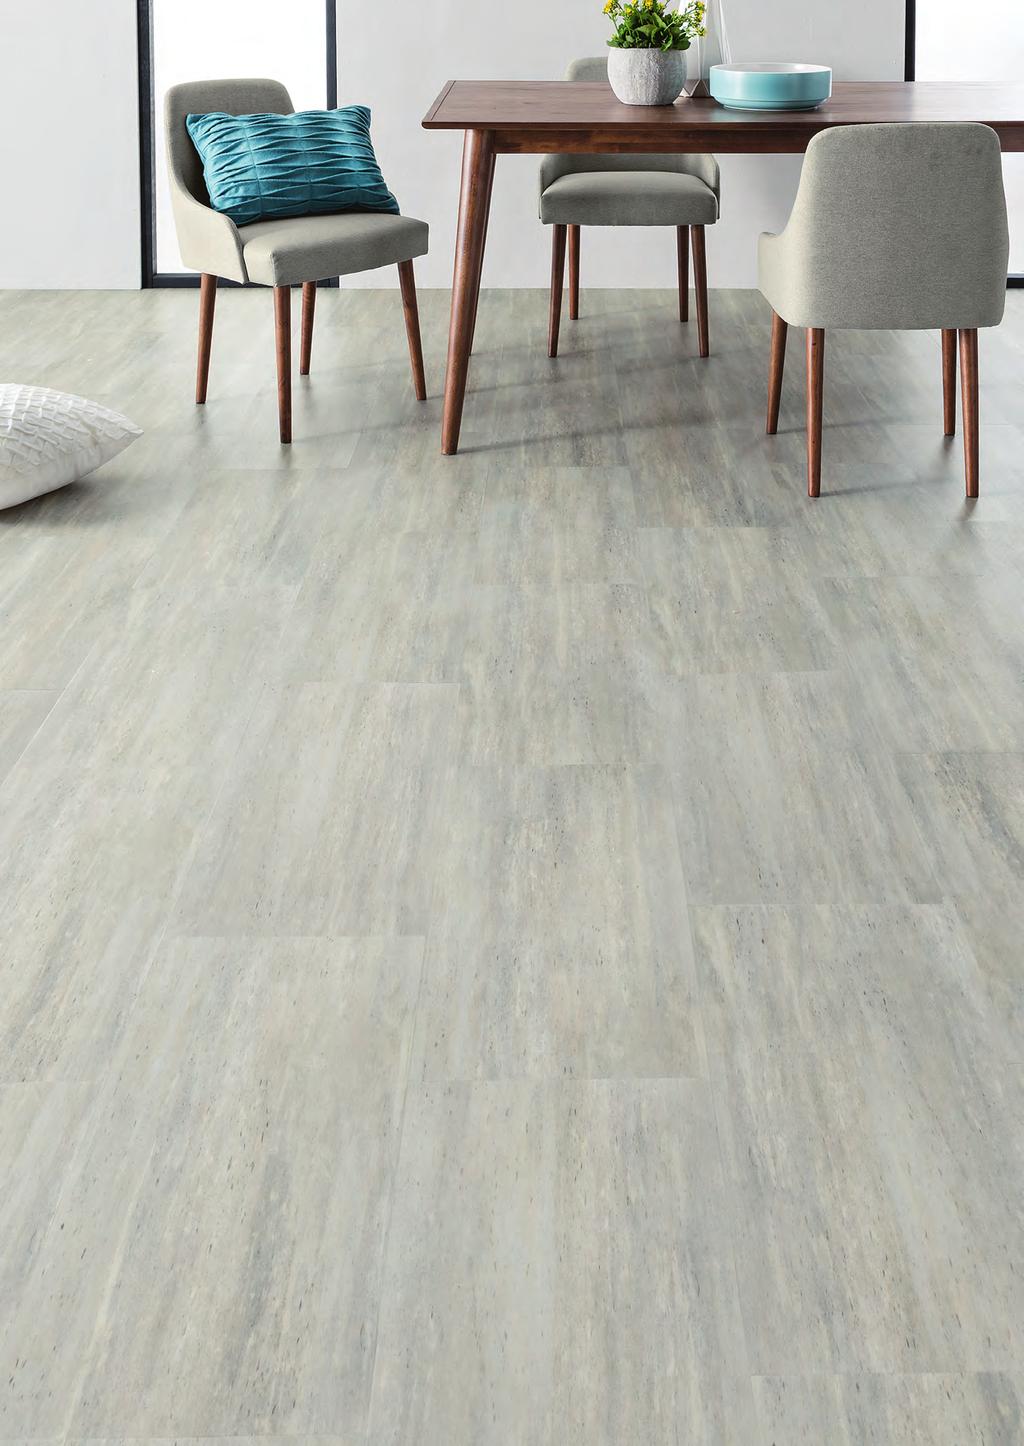 Allure Locking Gen 4 Tile - Silver Benton Allure is the ultimate stylish and